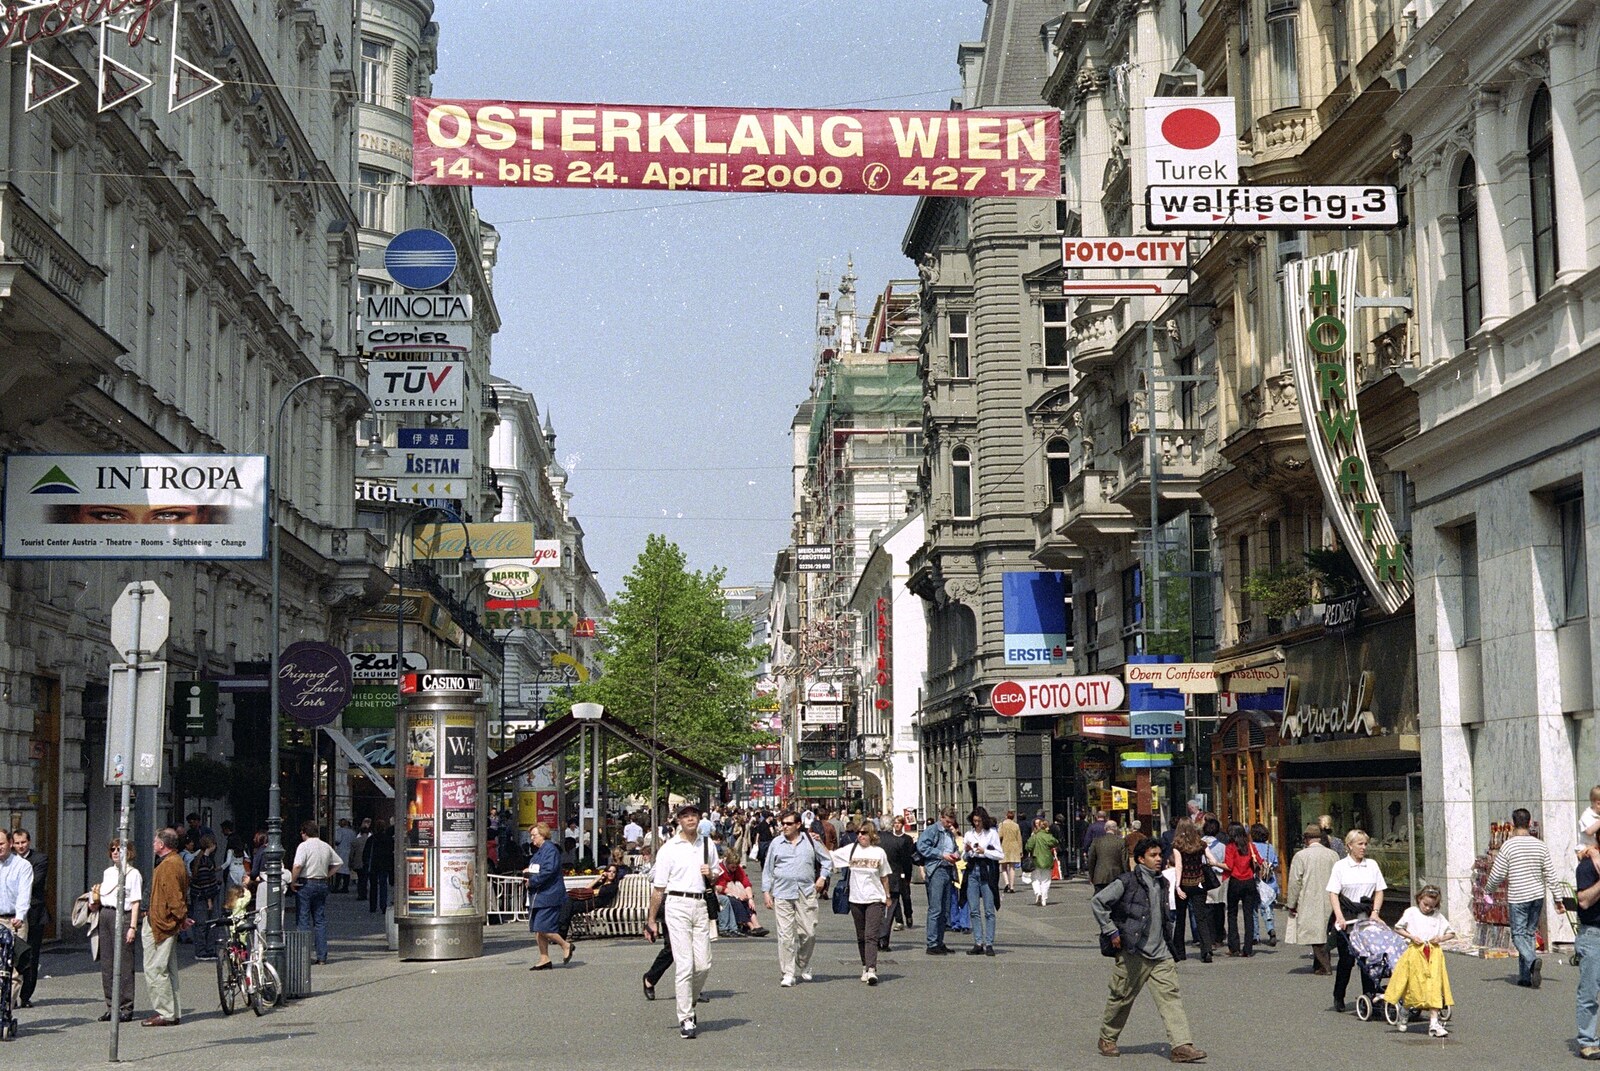 Crazy signage on a Vienna street from A Postcard From Hofburg Palace, Vienna, Austria - 18th April 2000